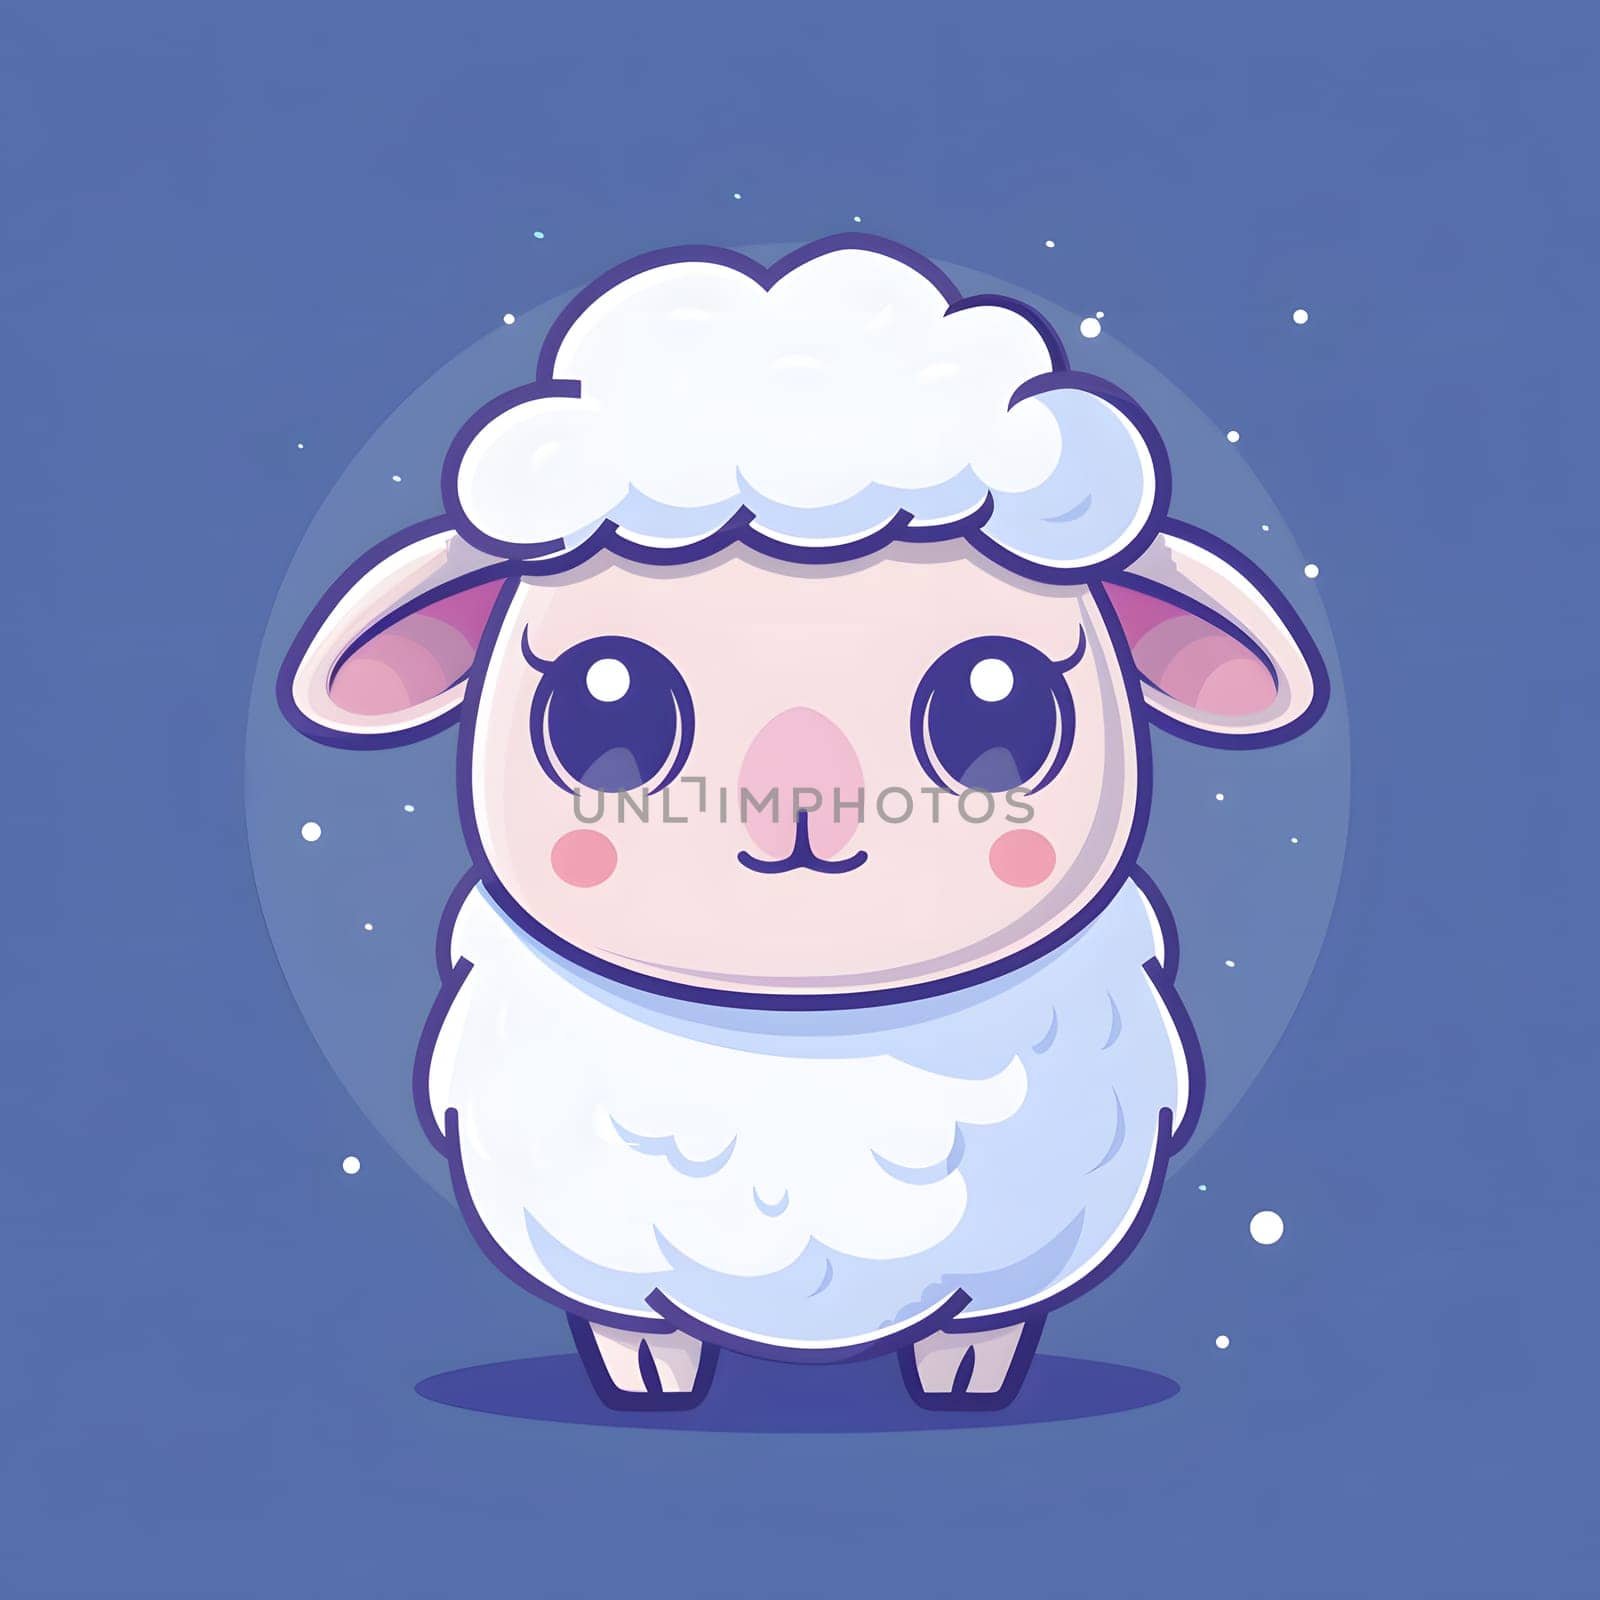 A happy animated cartoon sheep with big eyes is standing on an electric blue background, pleased with a cute gesture. Illustrated in a charming font, art, and graphics